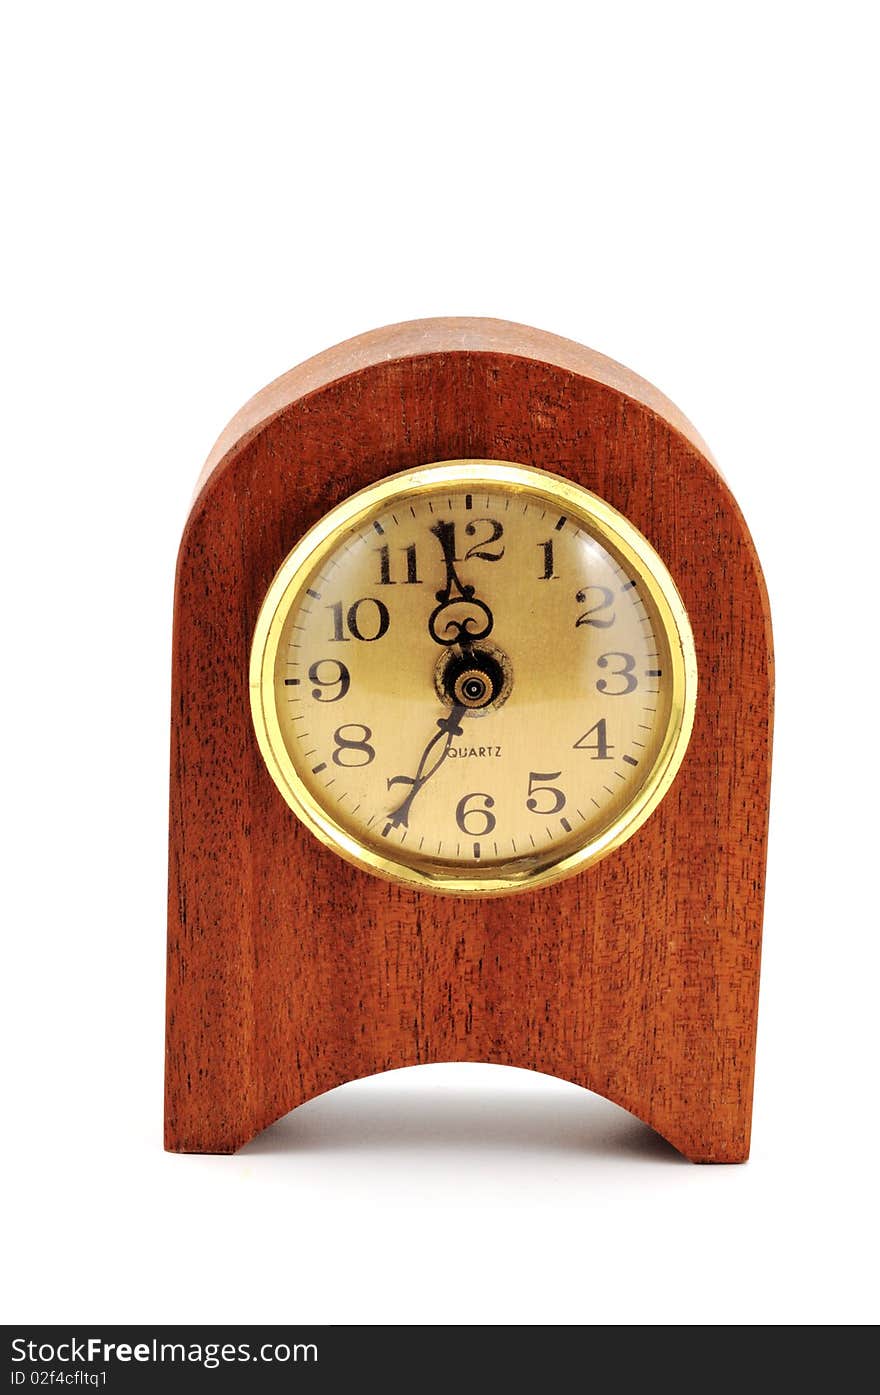 Table clock in a frame of wood photographed in front of white background. Table clock in a frame of wood photographed in front of white background